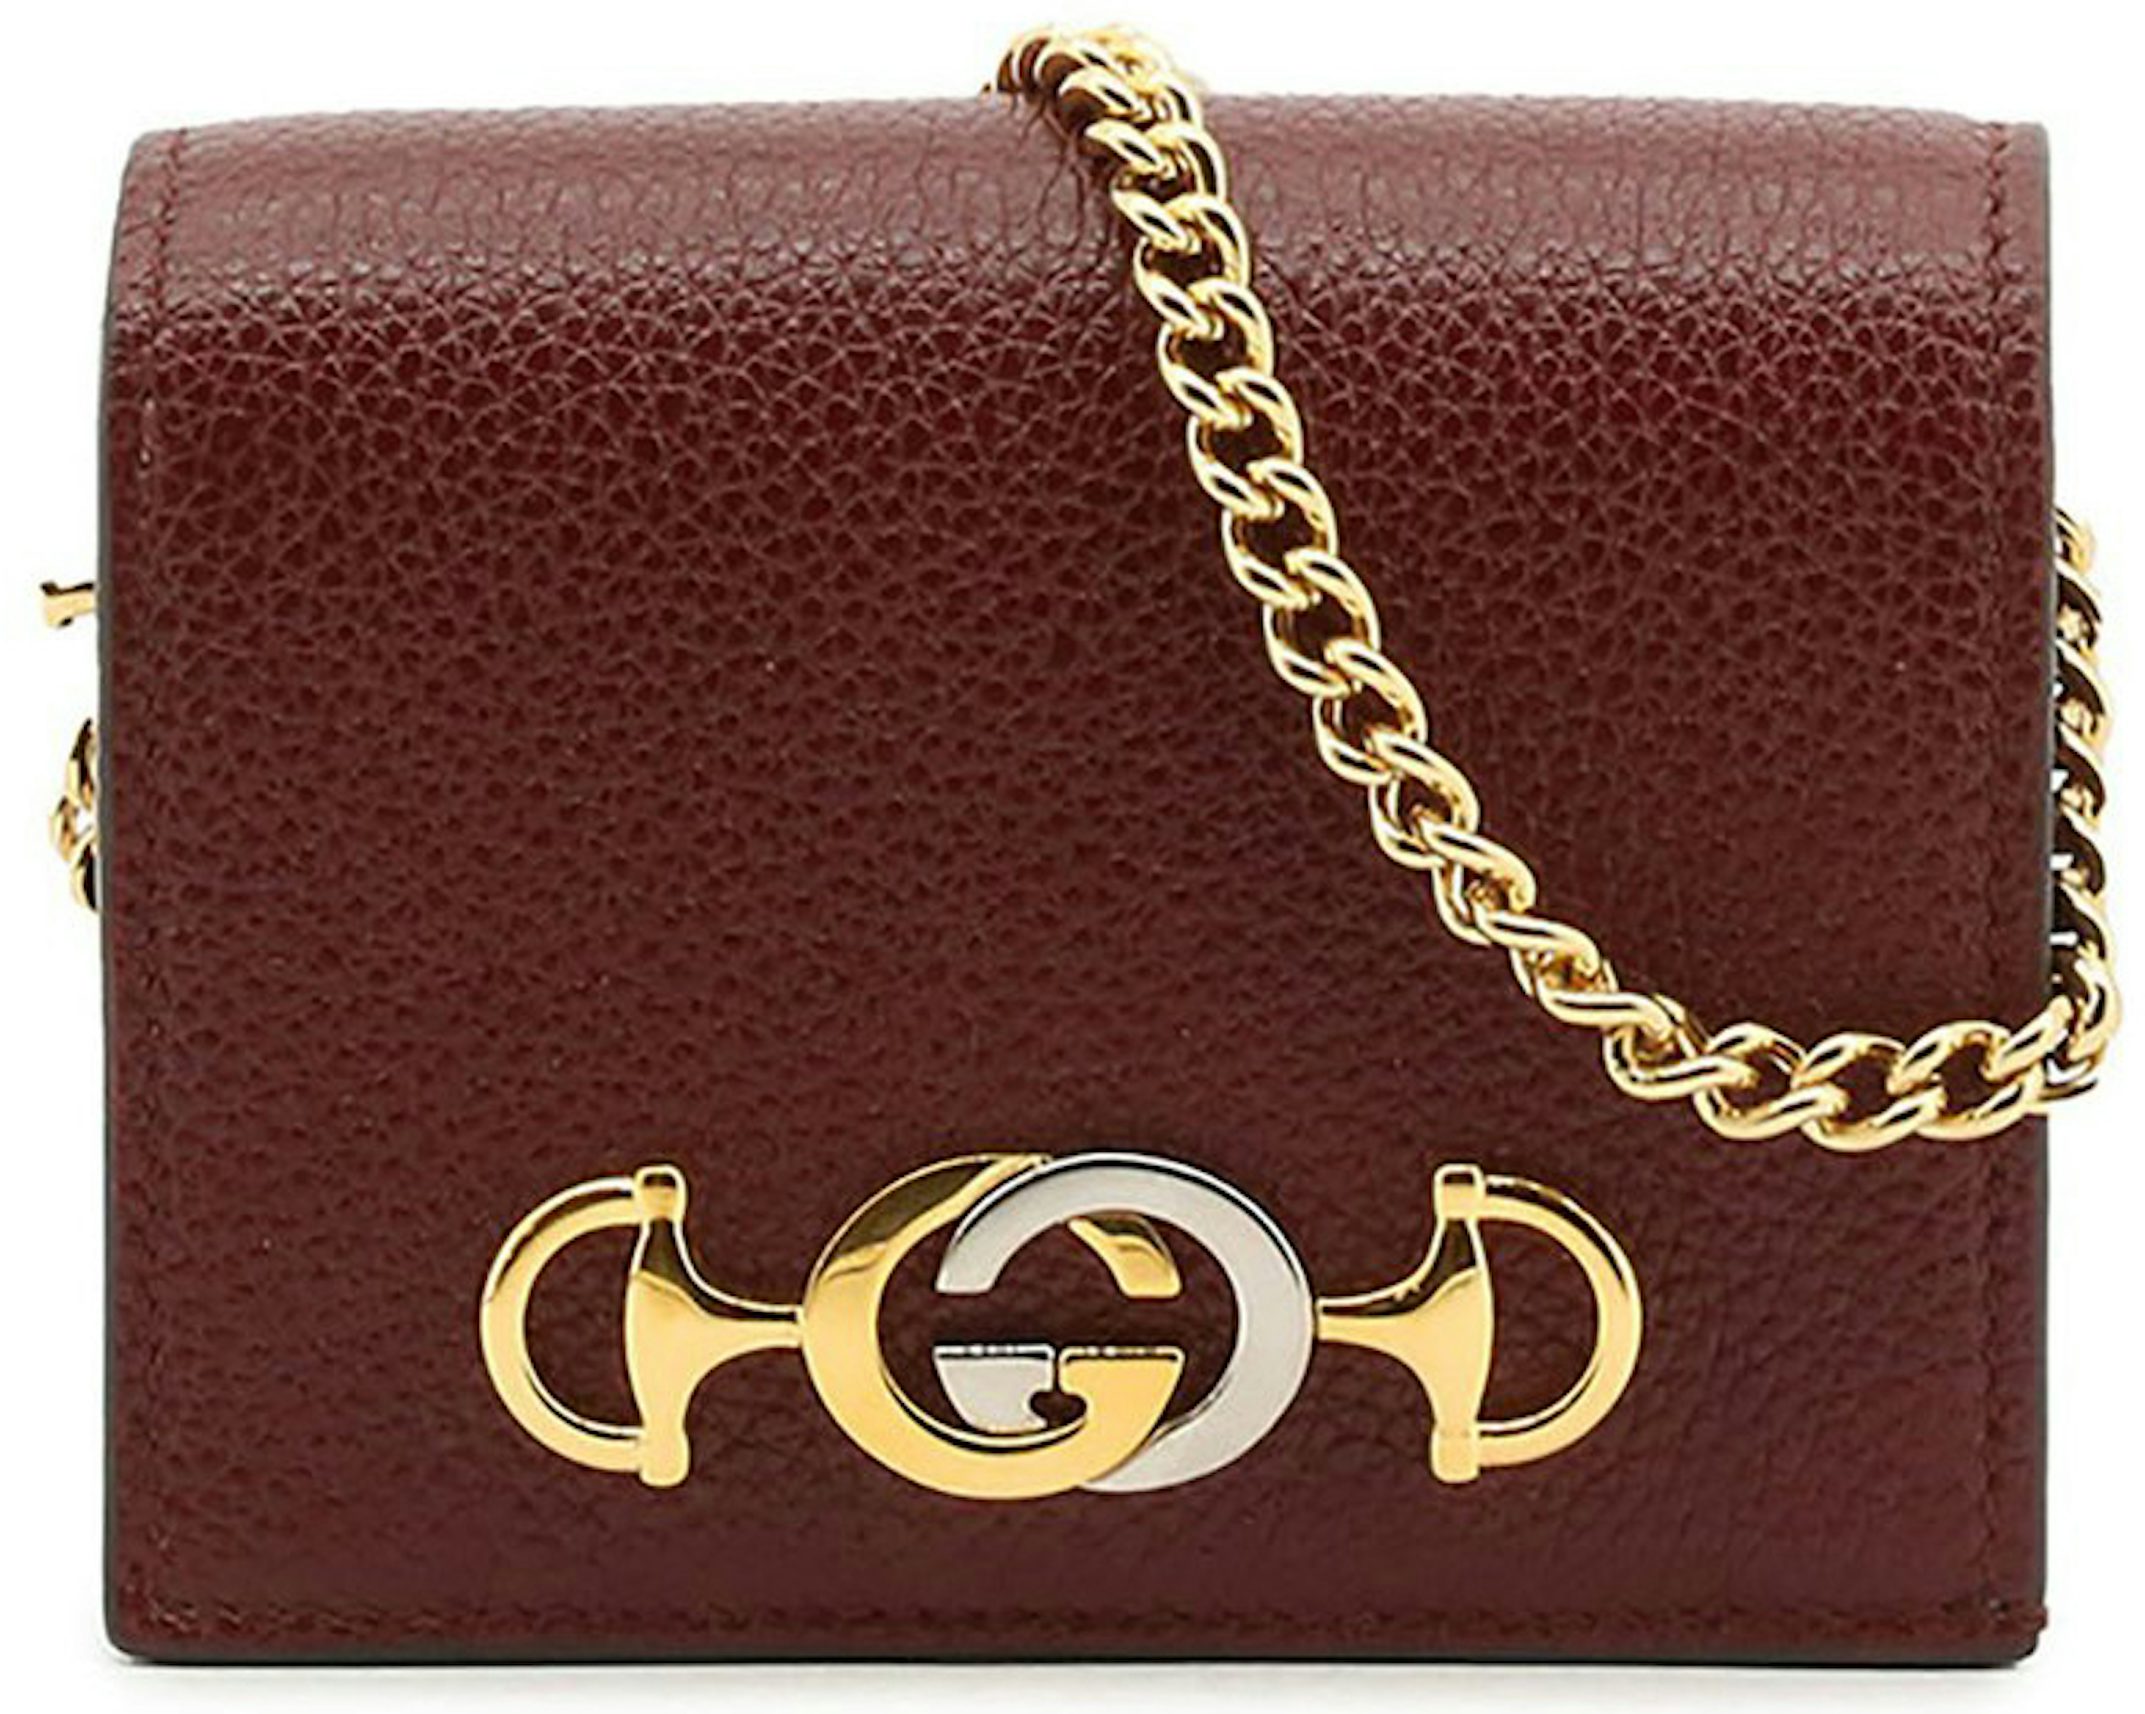 Ivory Gucci GG Interlocking Pebbled Leather Wallet on Chain